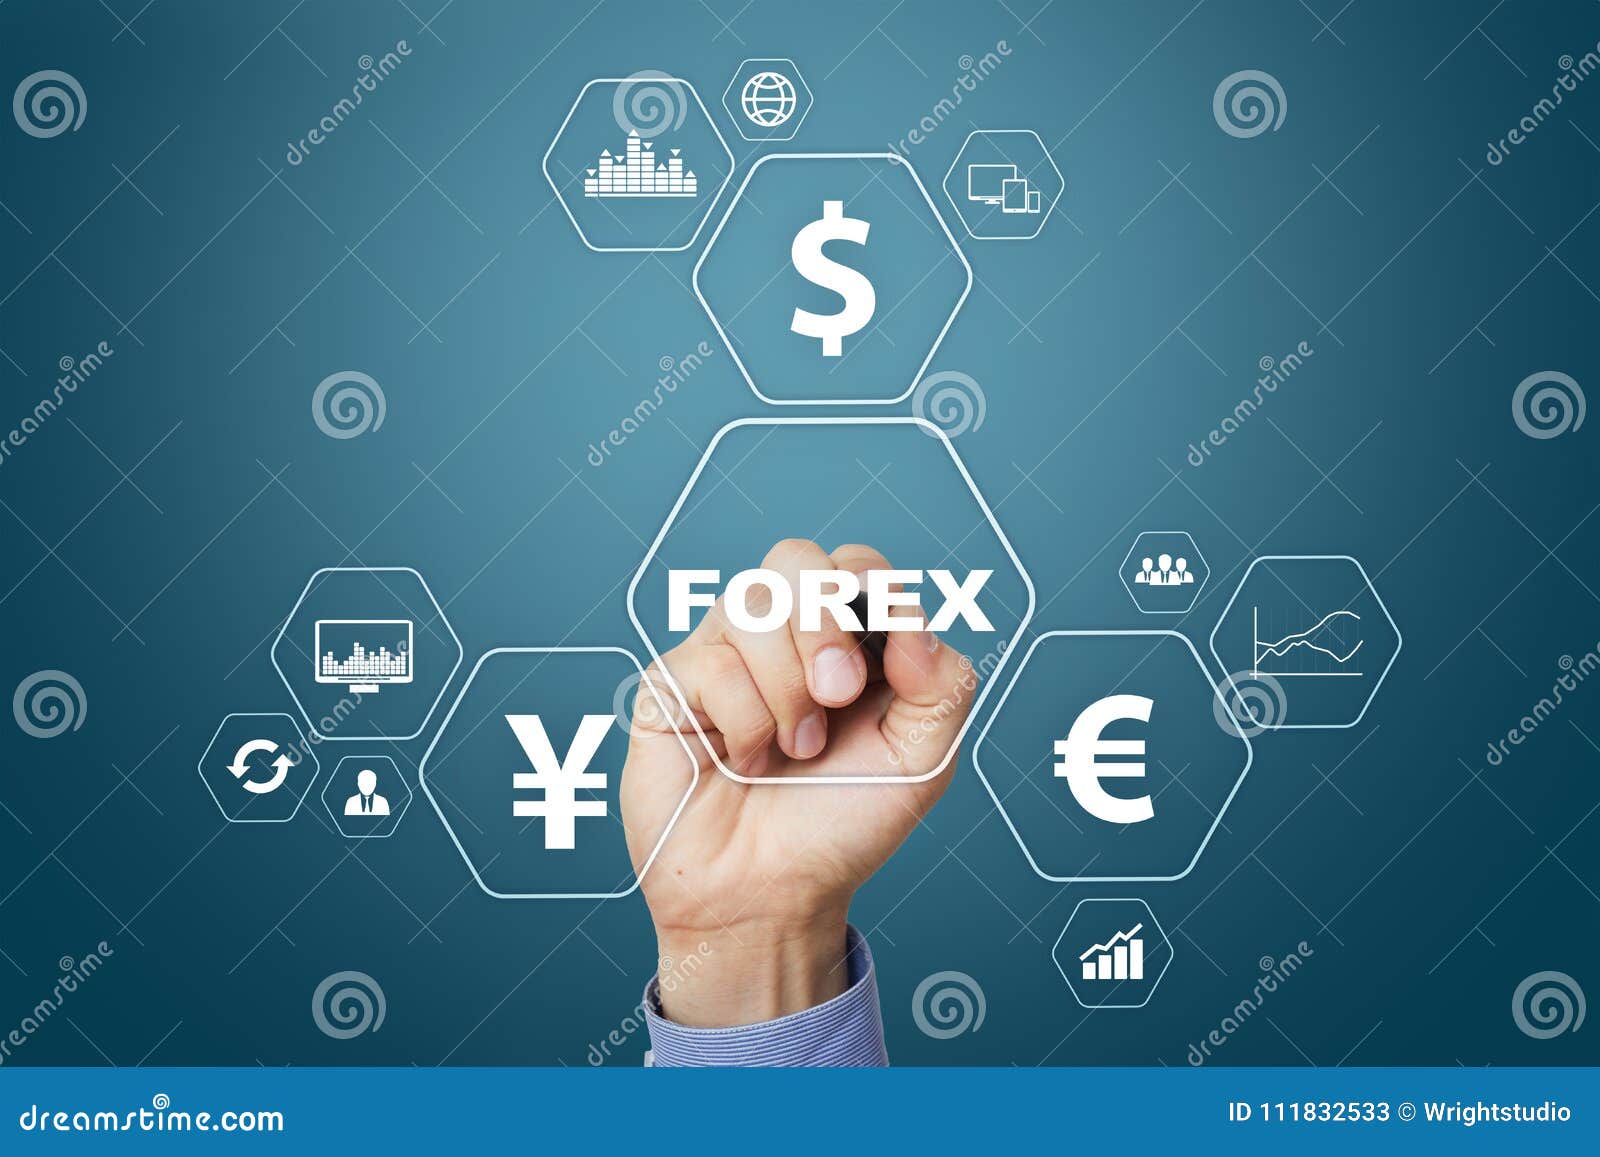 online forex trading without investment